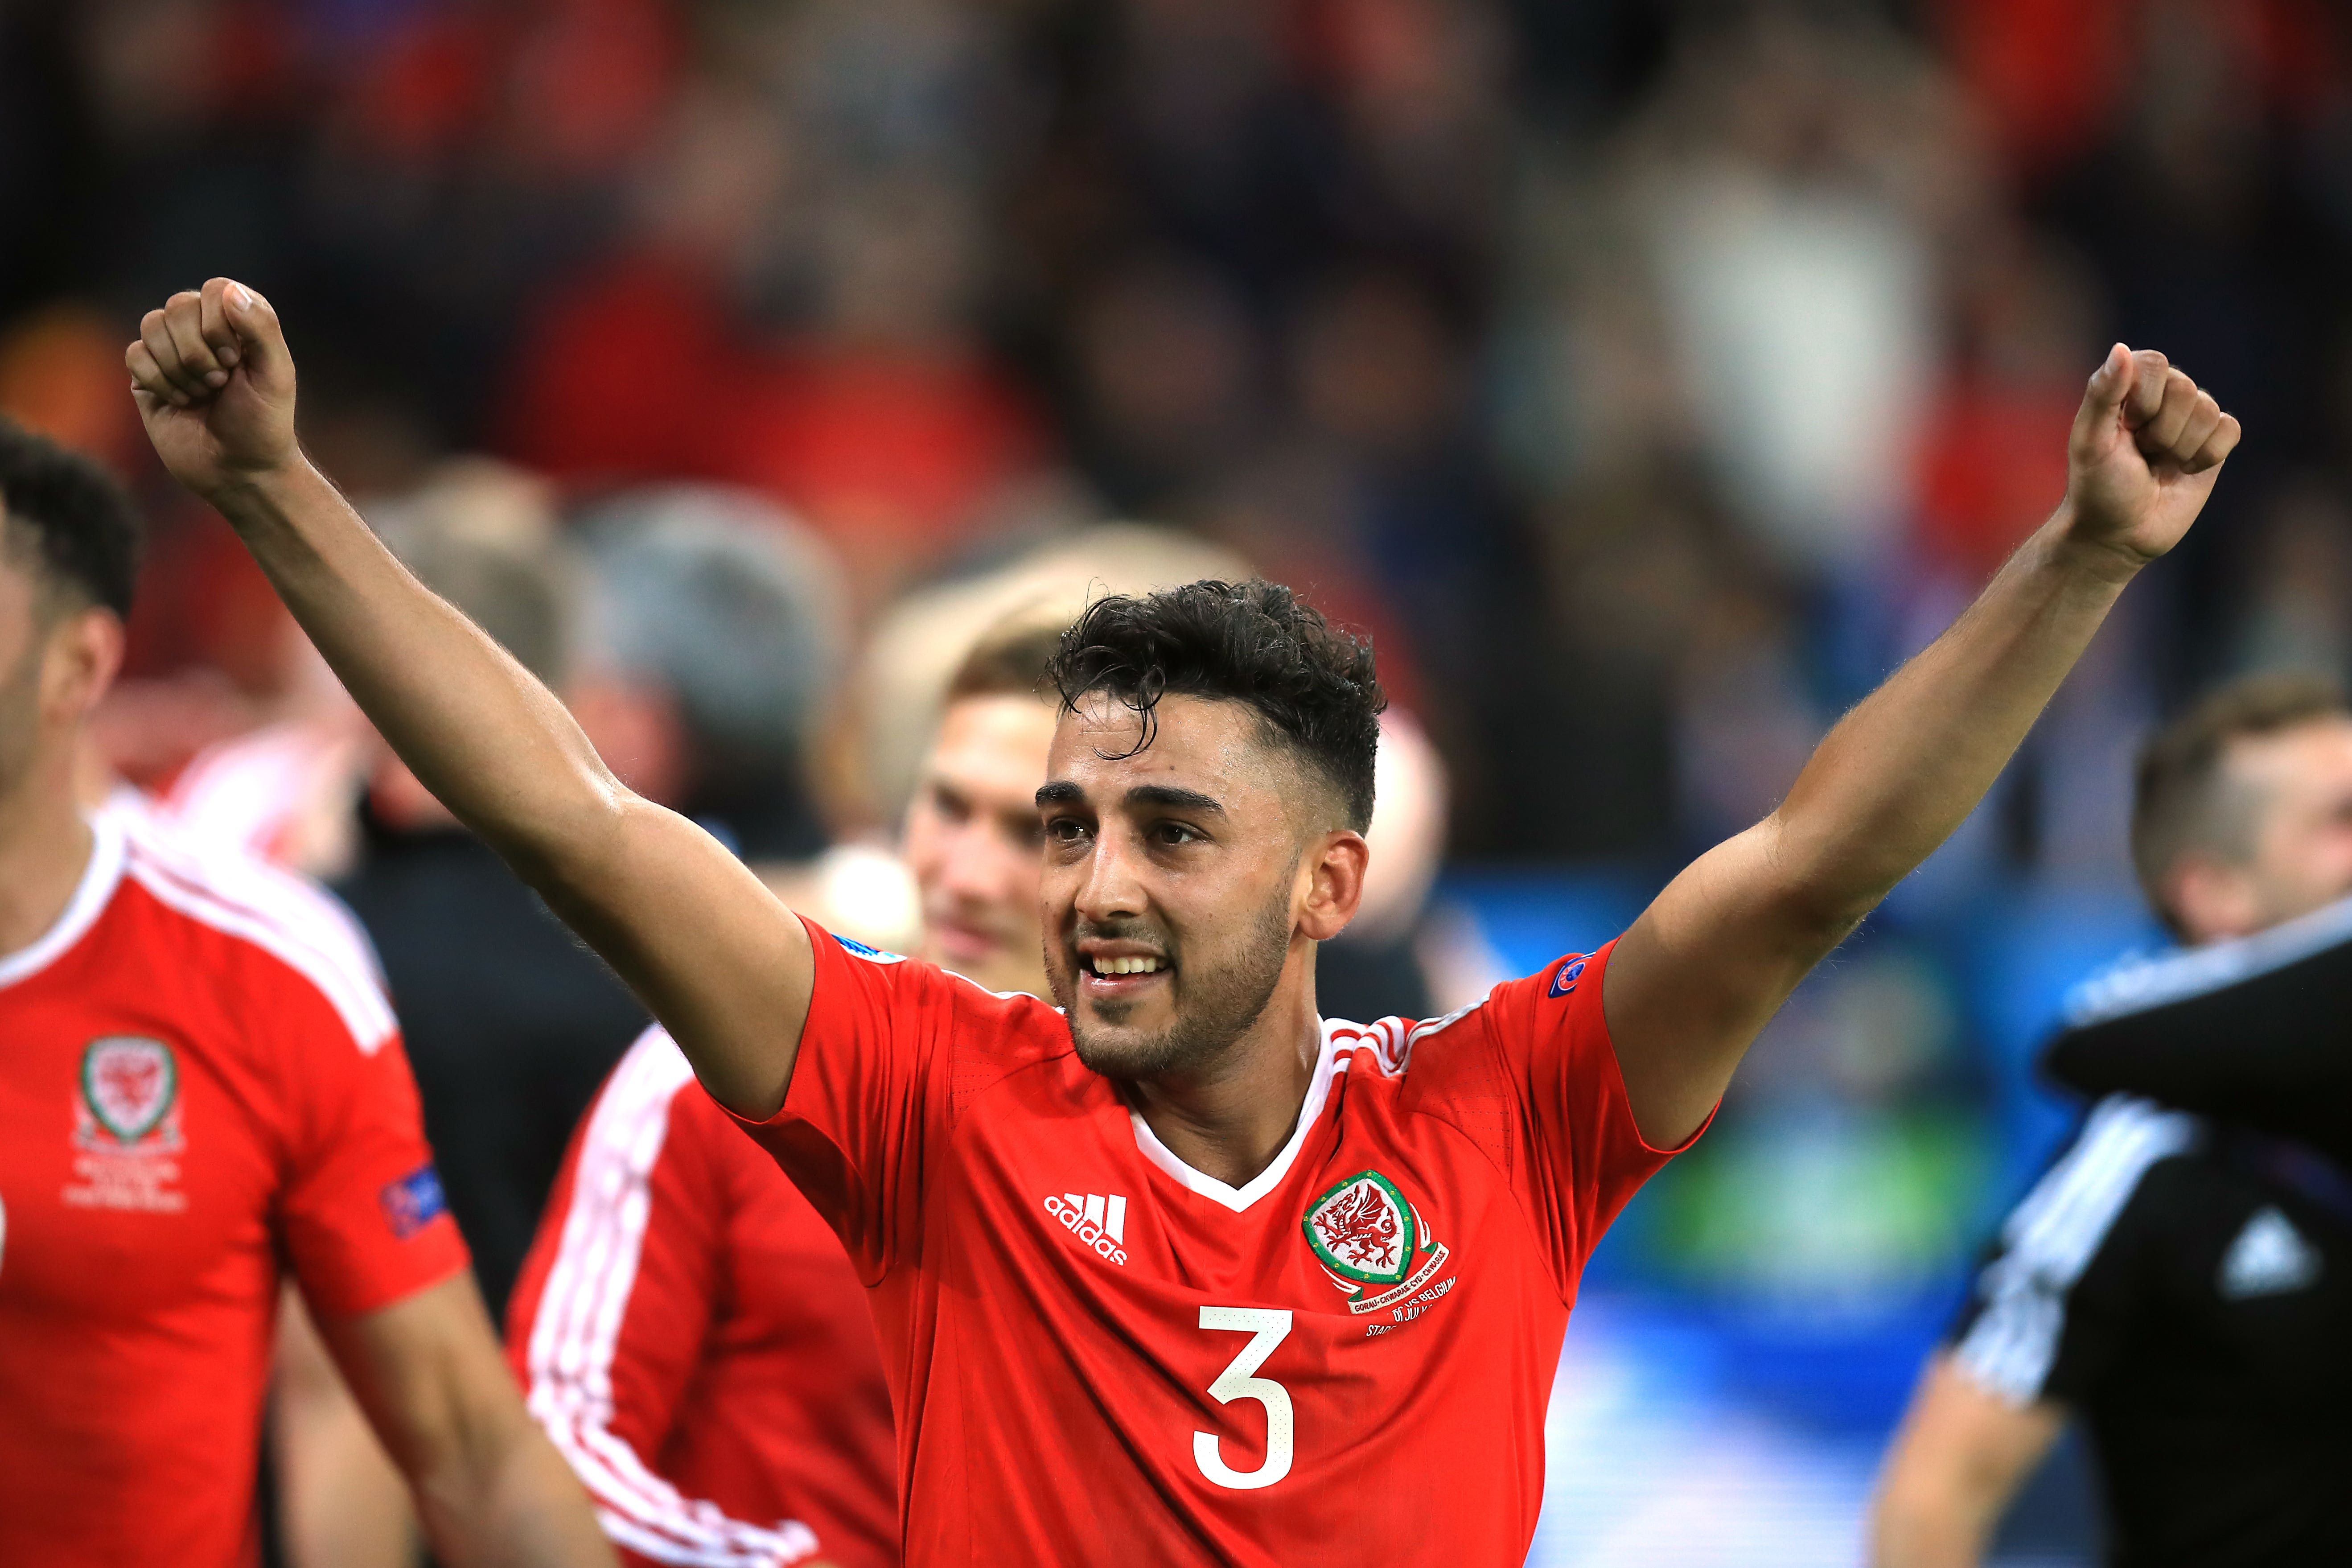 Former Wales defender Neil Taylor has retired from playing at the age of 33 (Mike Egerton/PA)